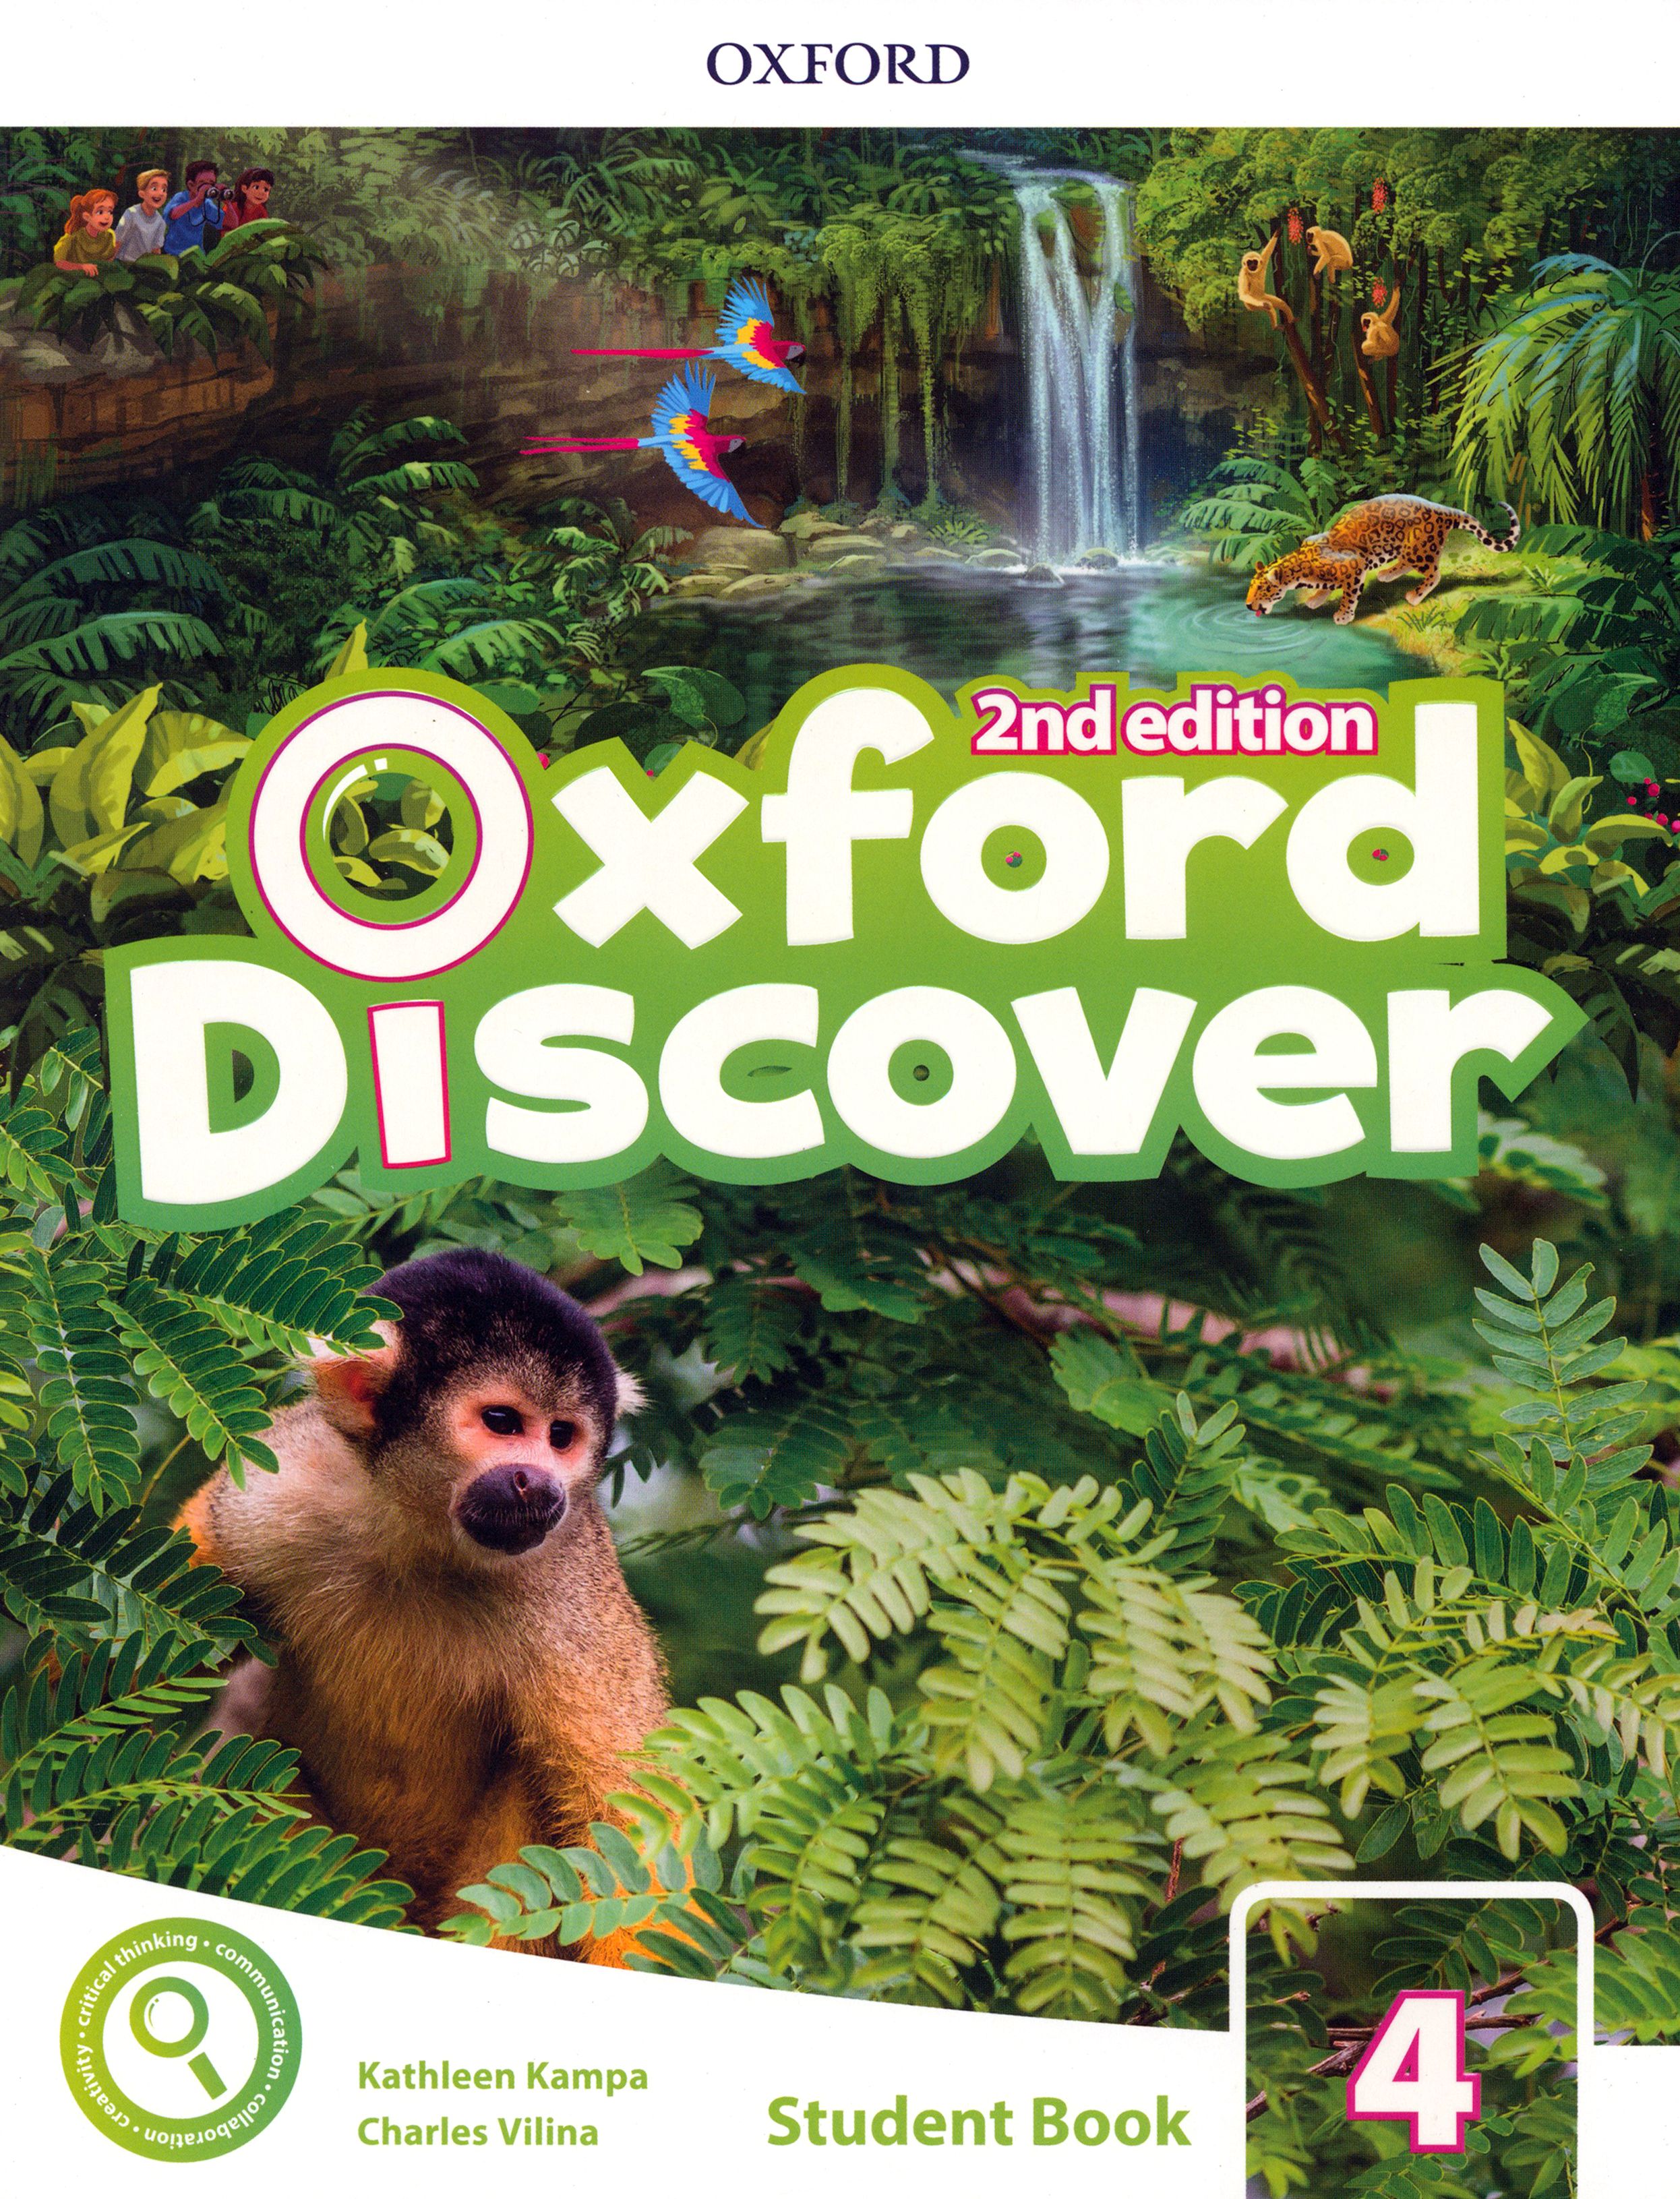 Oxford discover 4. Oxford discover 4 2nd Edition. Oxford discover 2nd Edition 5. Oxford discover 2nd Edition. Oxford discover 2 student book.